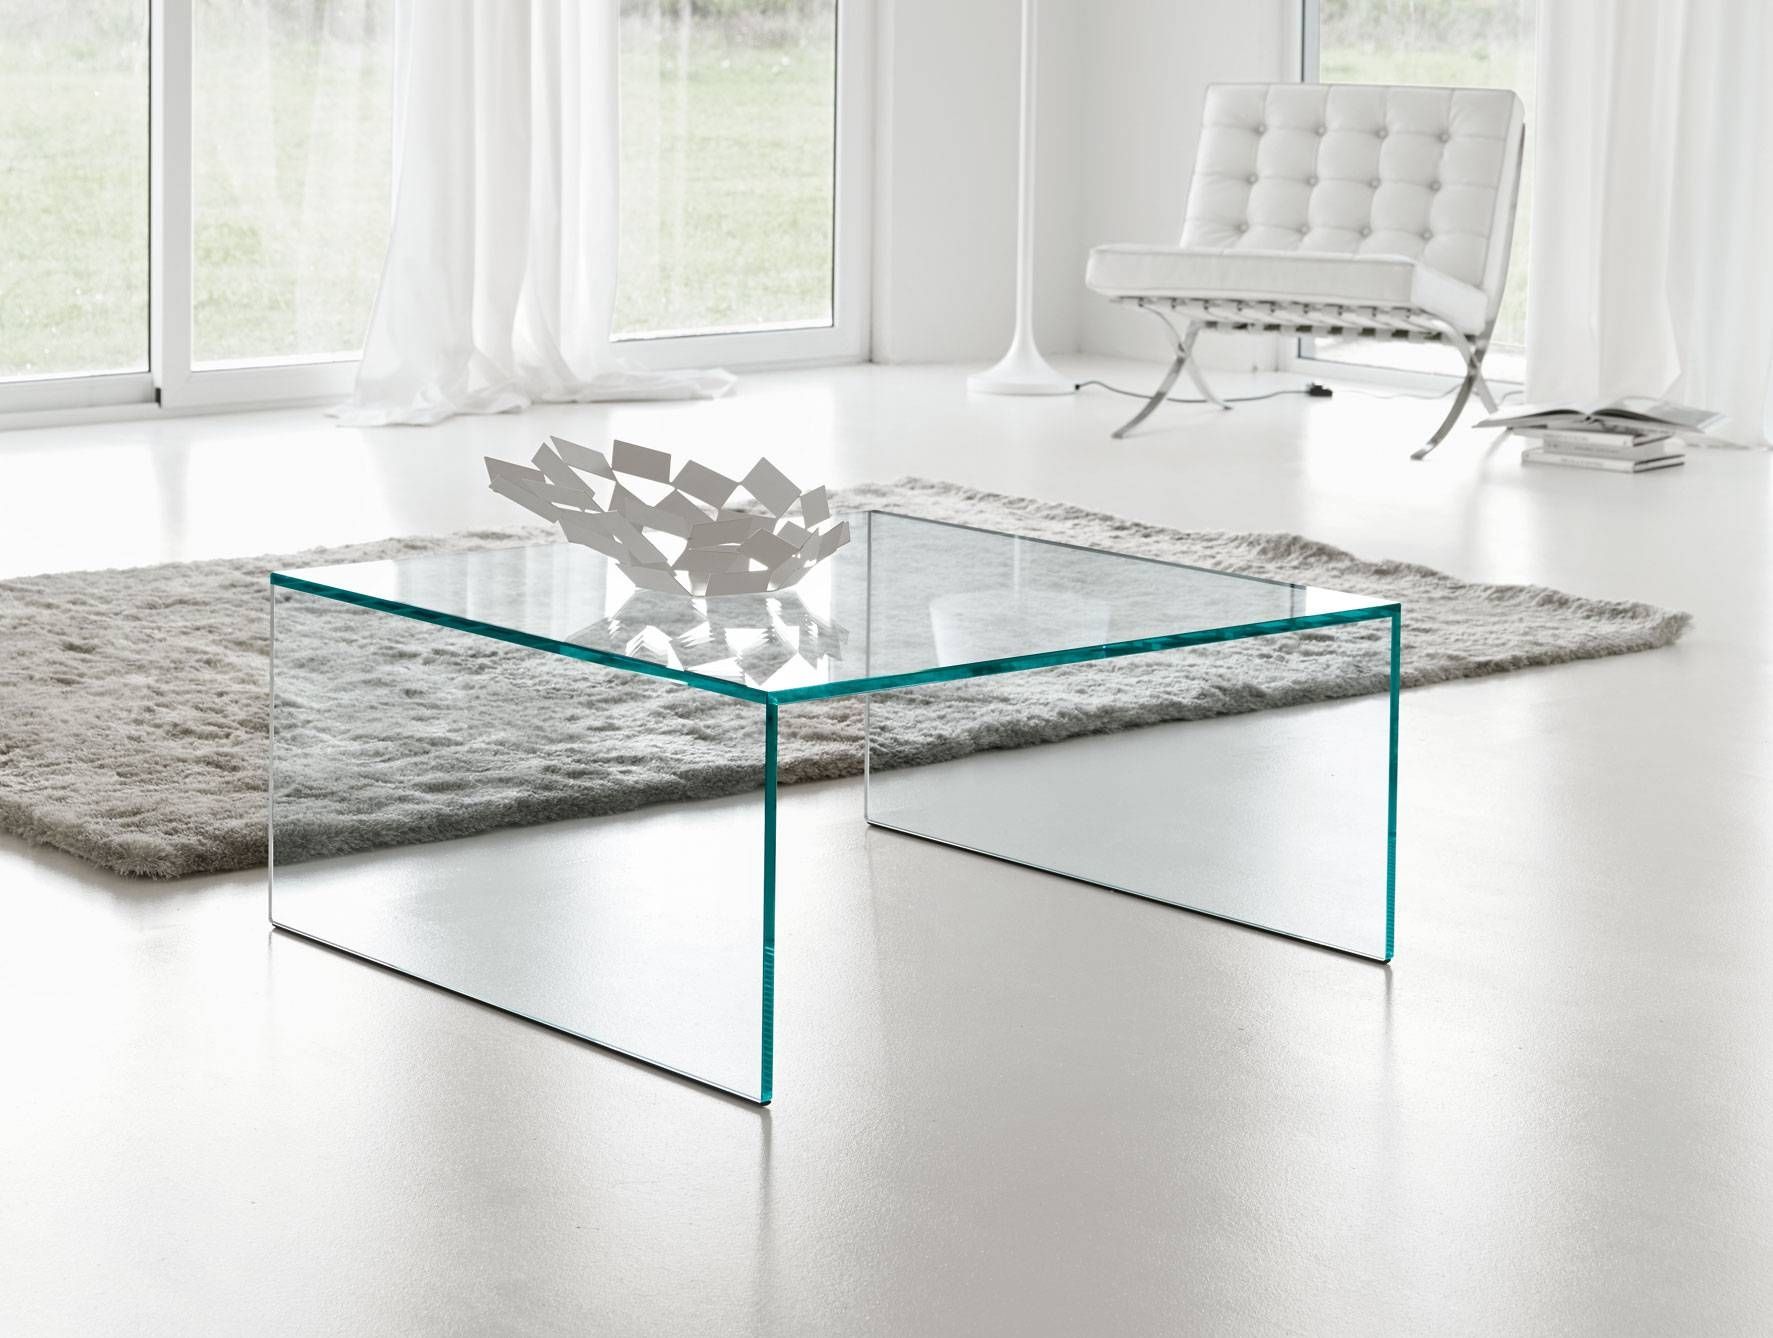 Coffee Table: Good All Glass Coffee Table Design Contemporary With Regard To All Glass Coffee Tables (View 3 of 30)